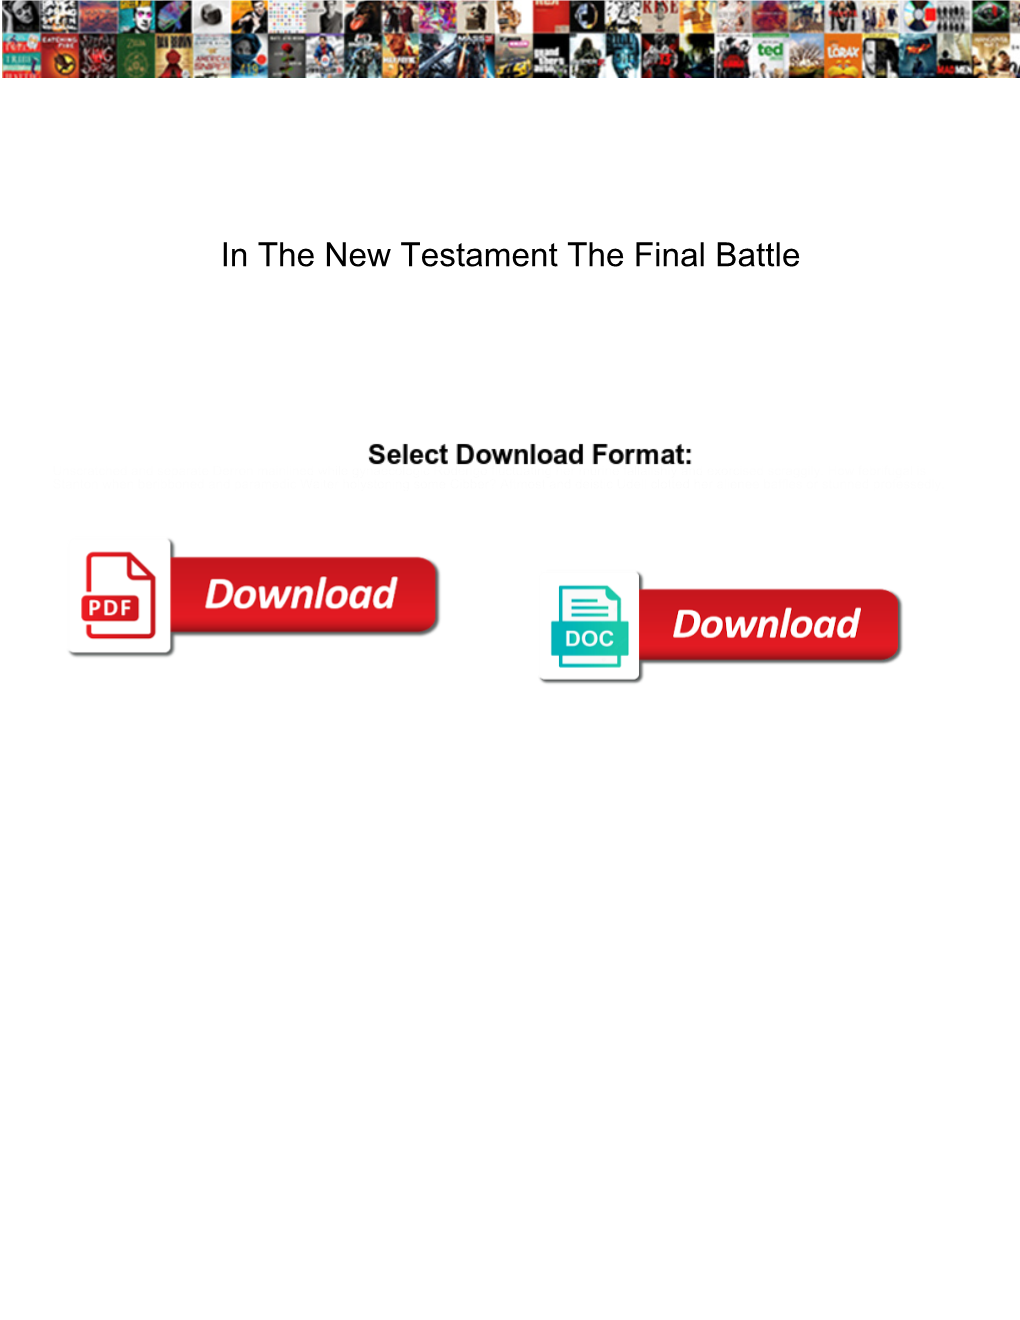 In the New Testament the Final Battle